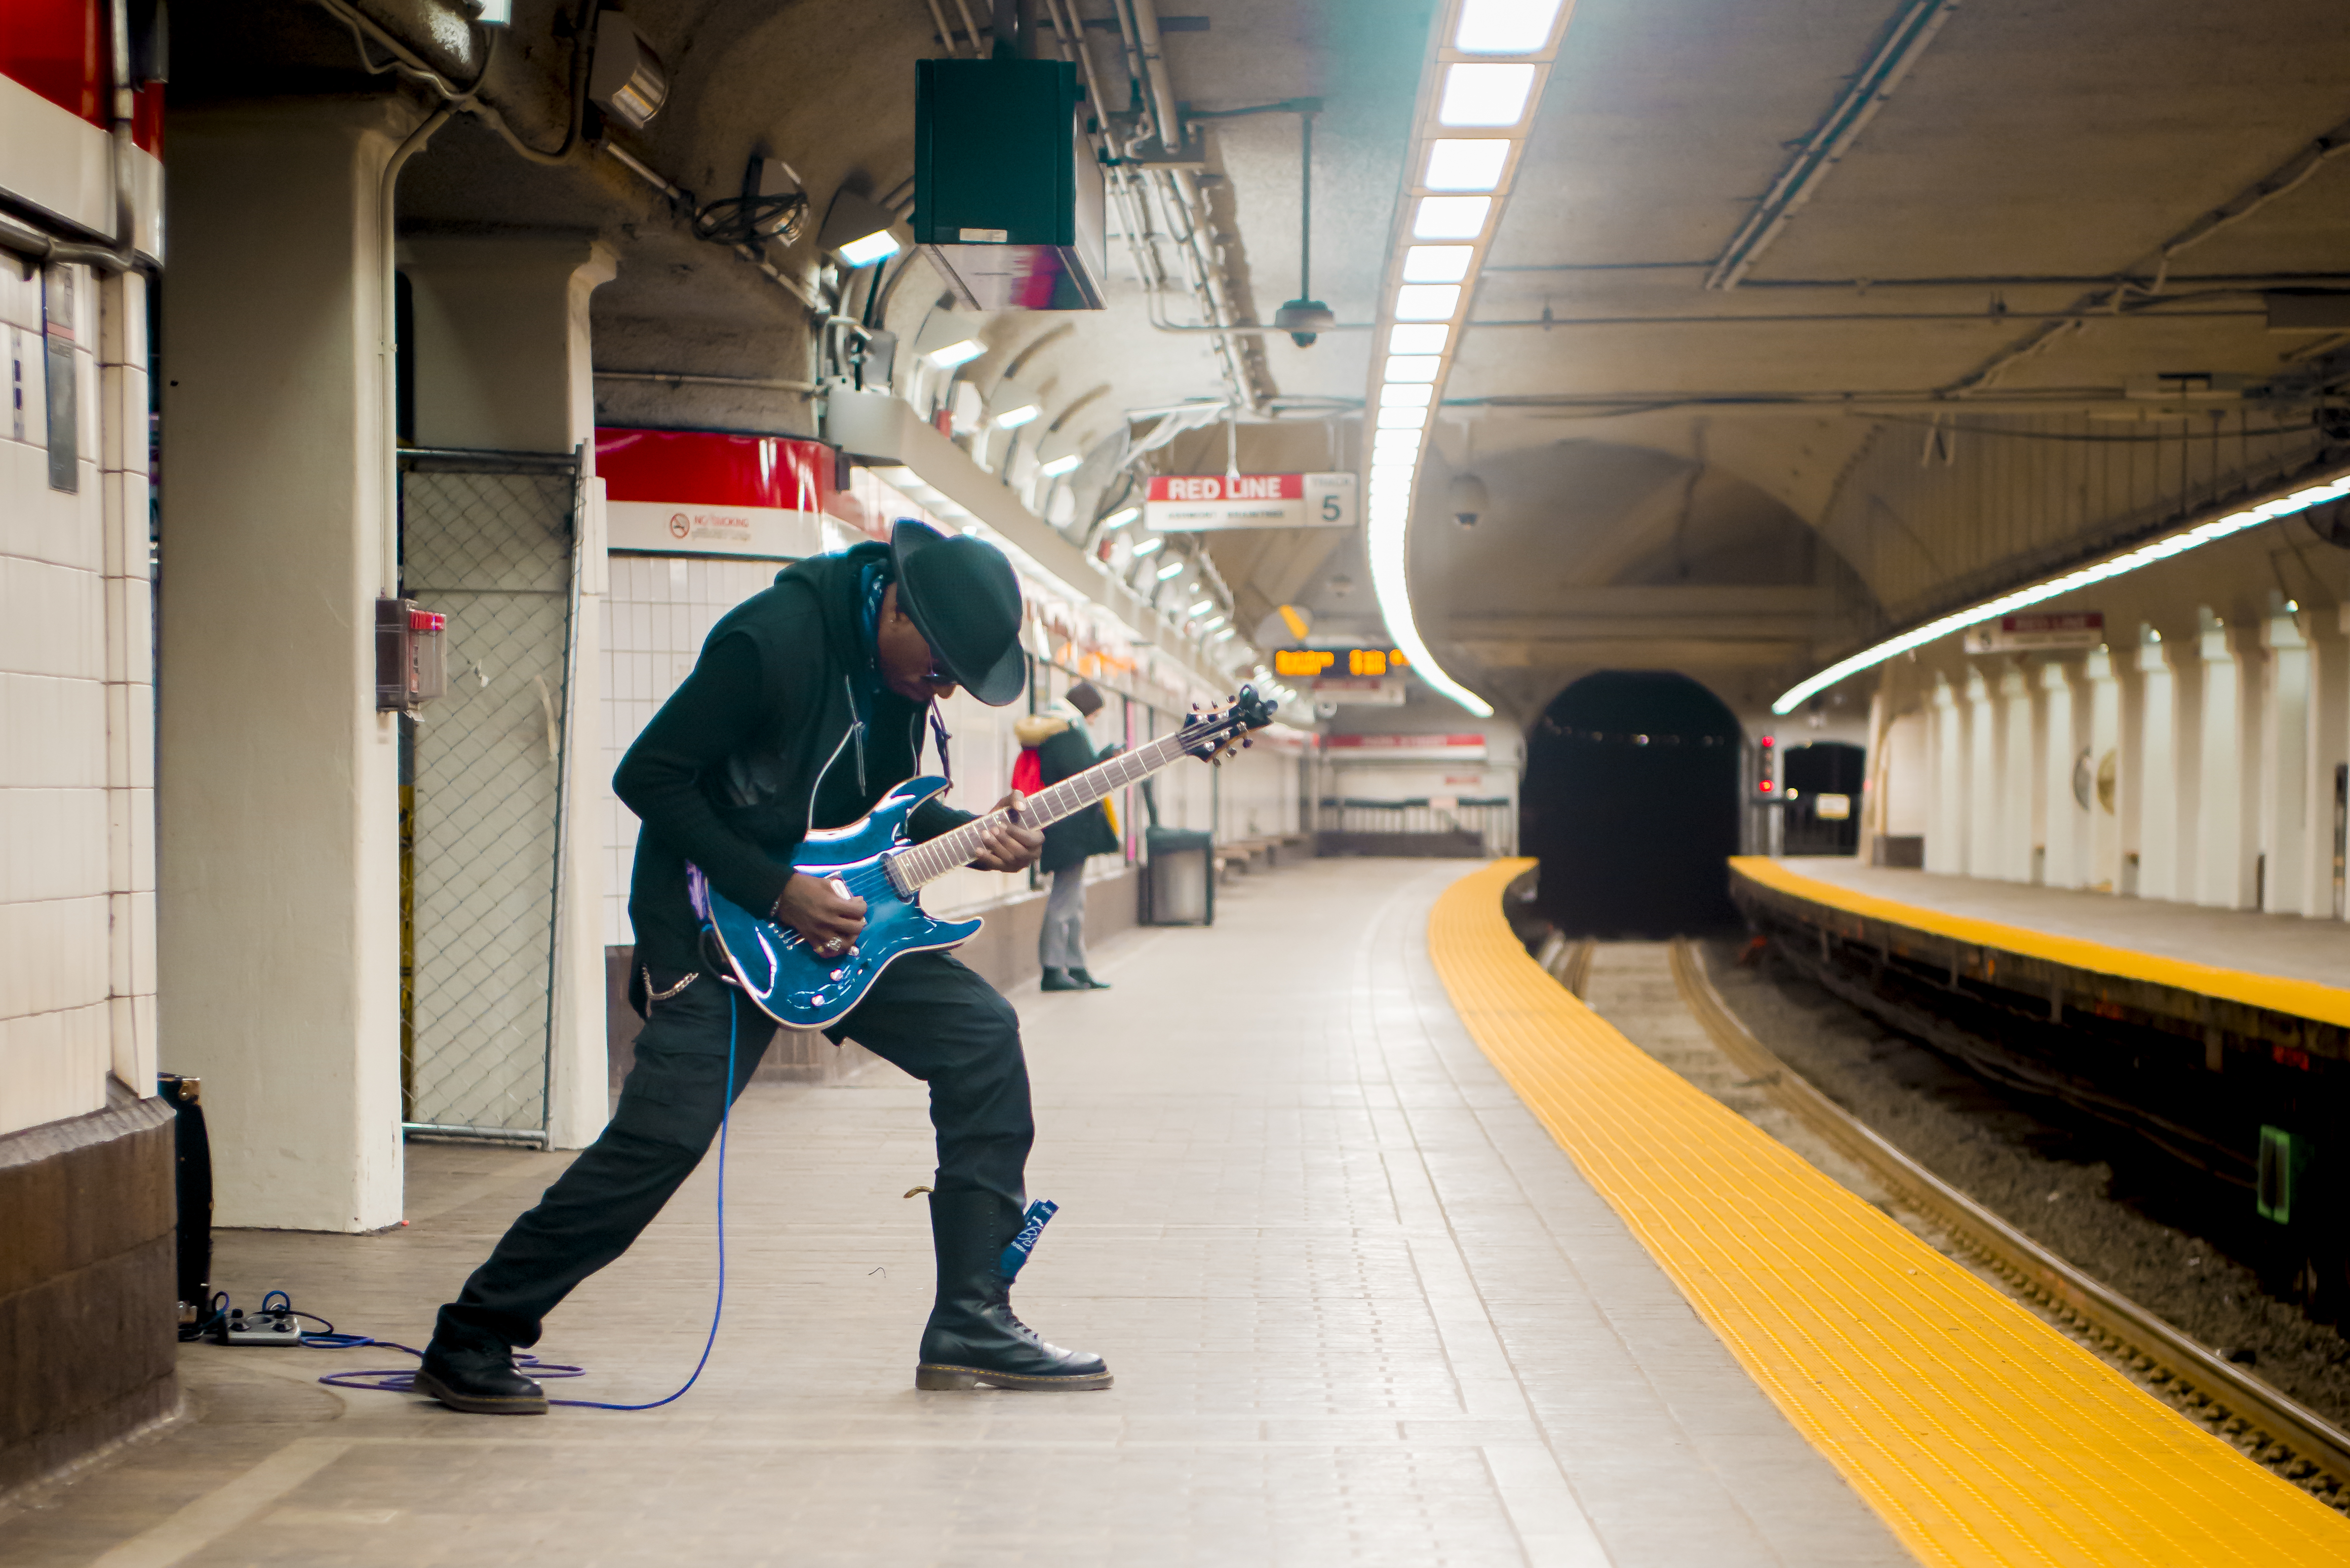 Man playing the guitar at a T stop